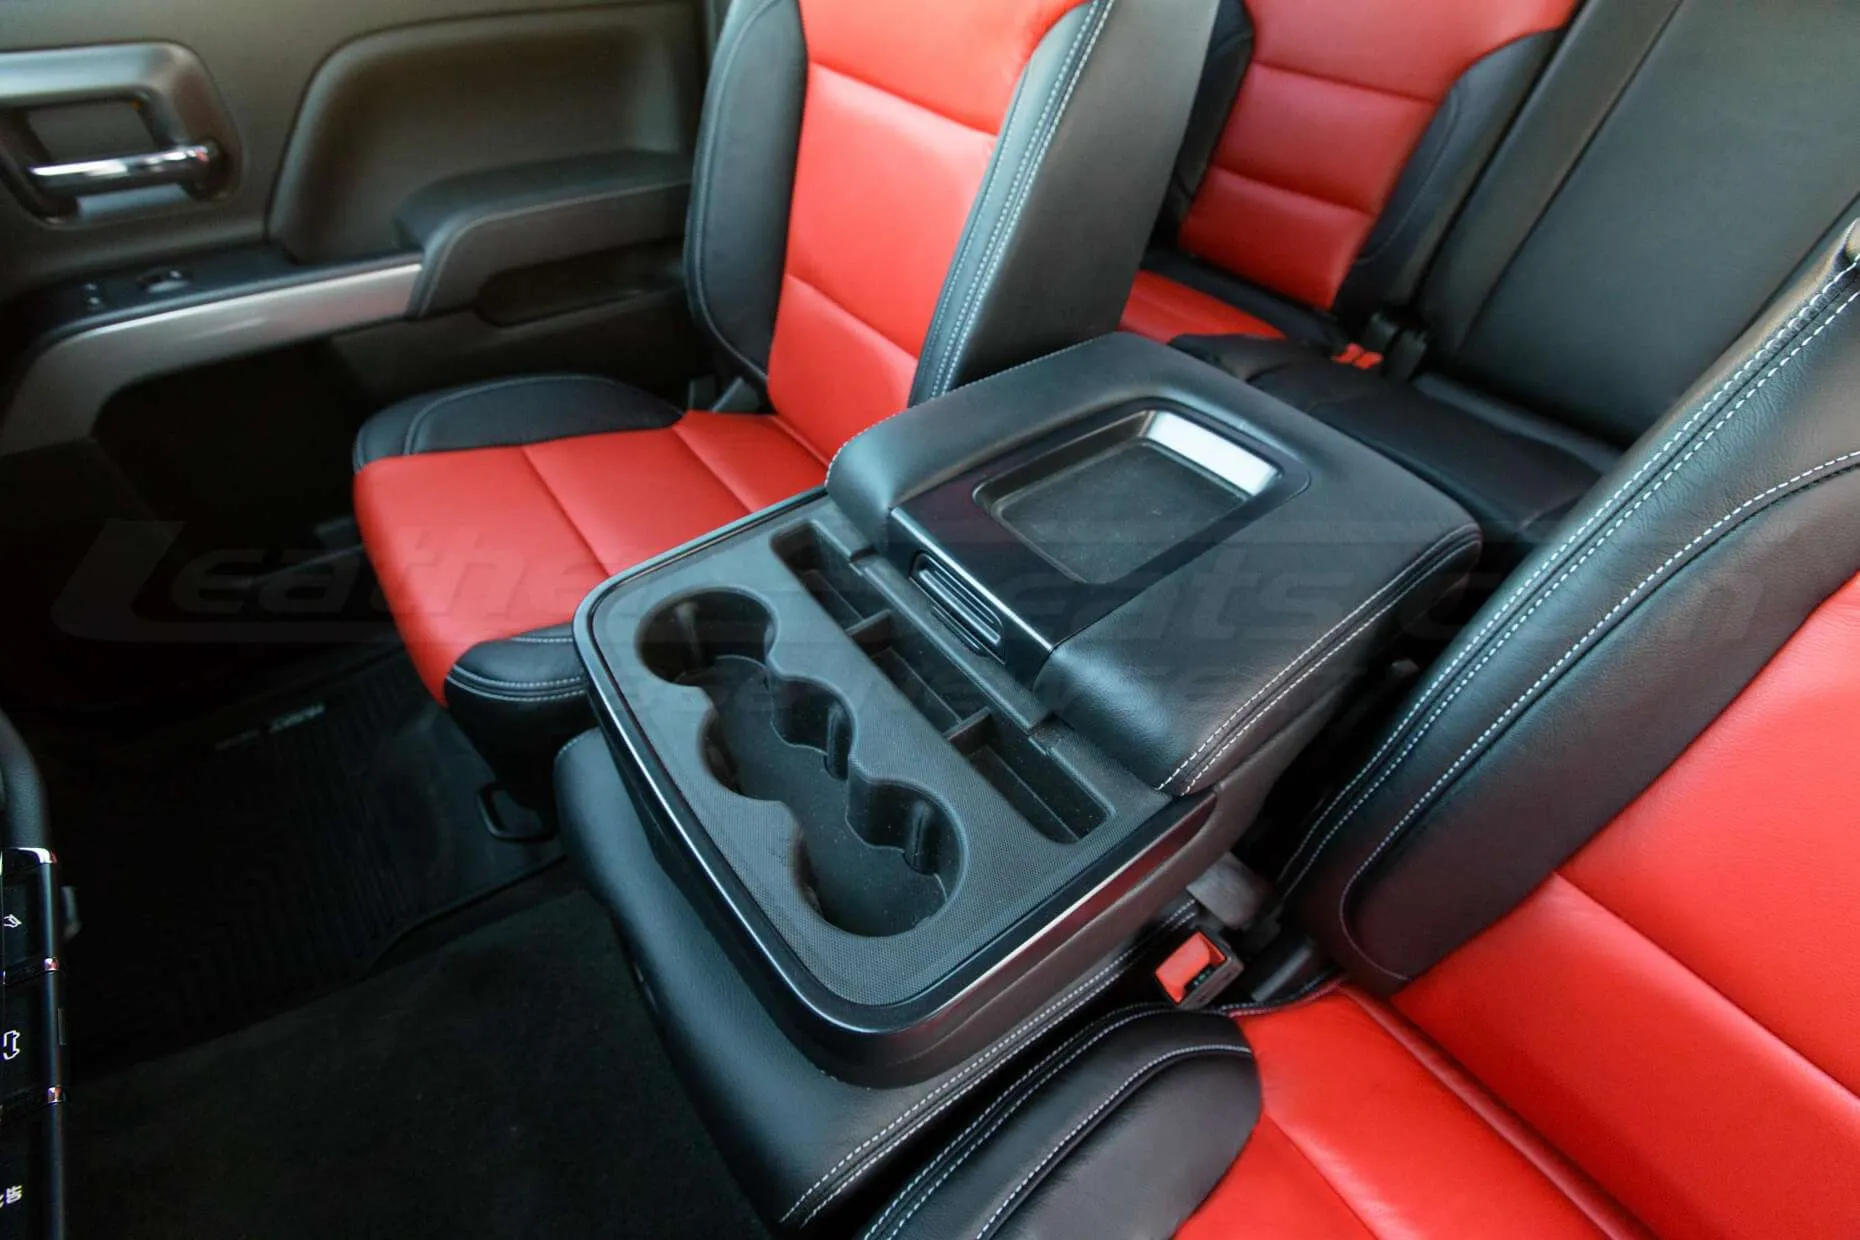 GMC Sierra leather upholstery kit - Black and Bright Red - Center Console